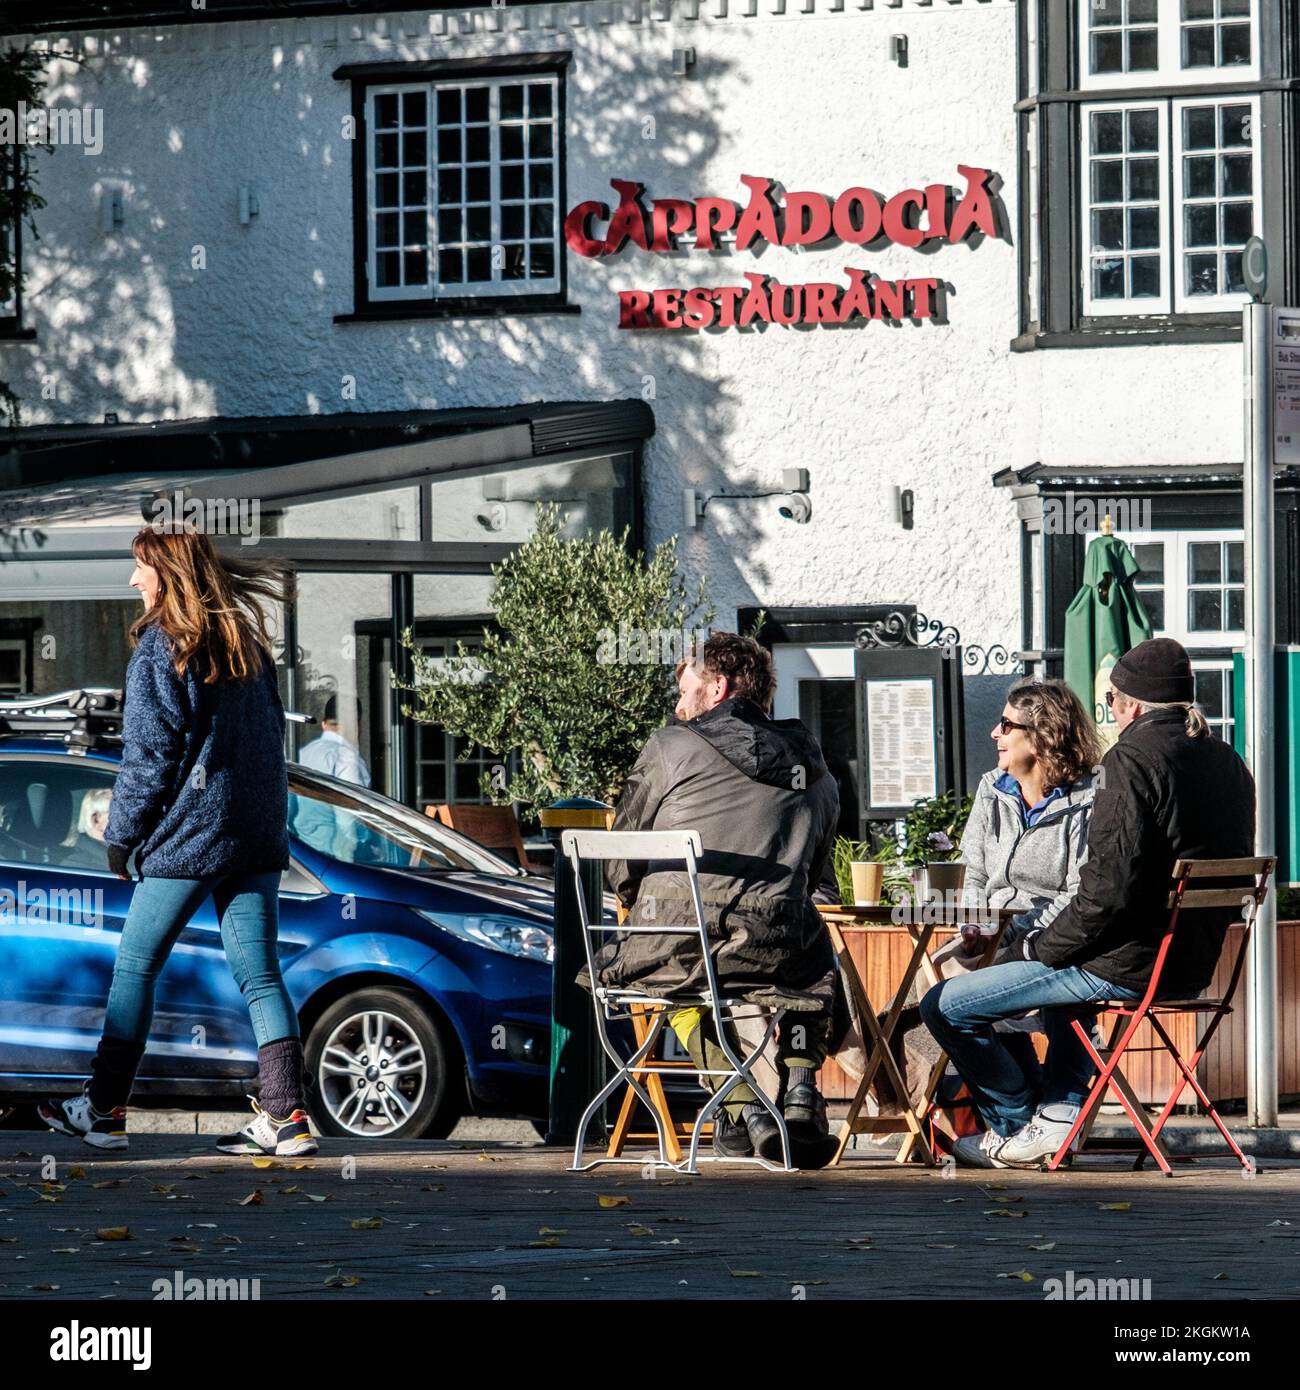 Epsom, Surrey, London UK, November 20 2022, Small Group Of People Sitting Outside Talking And Drinking Coffee With AWoman Walking Past Stock Photo